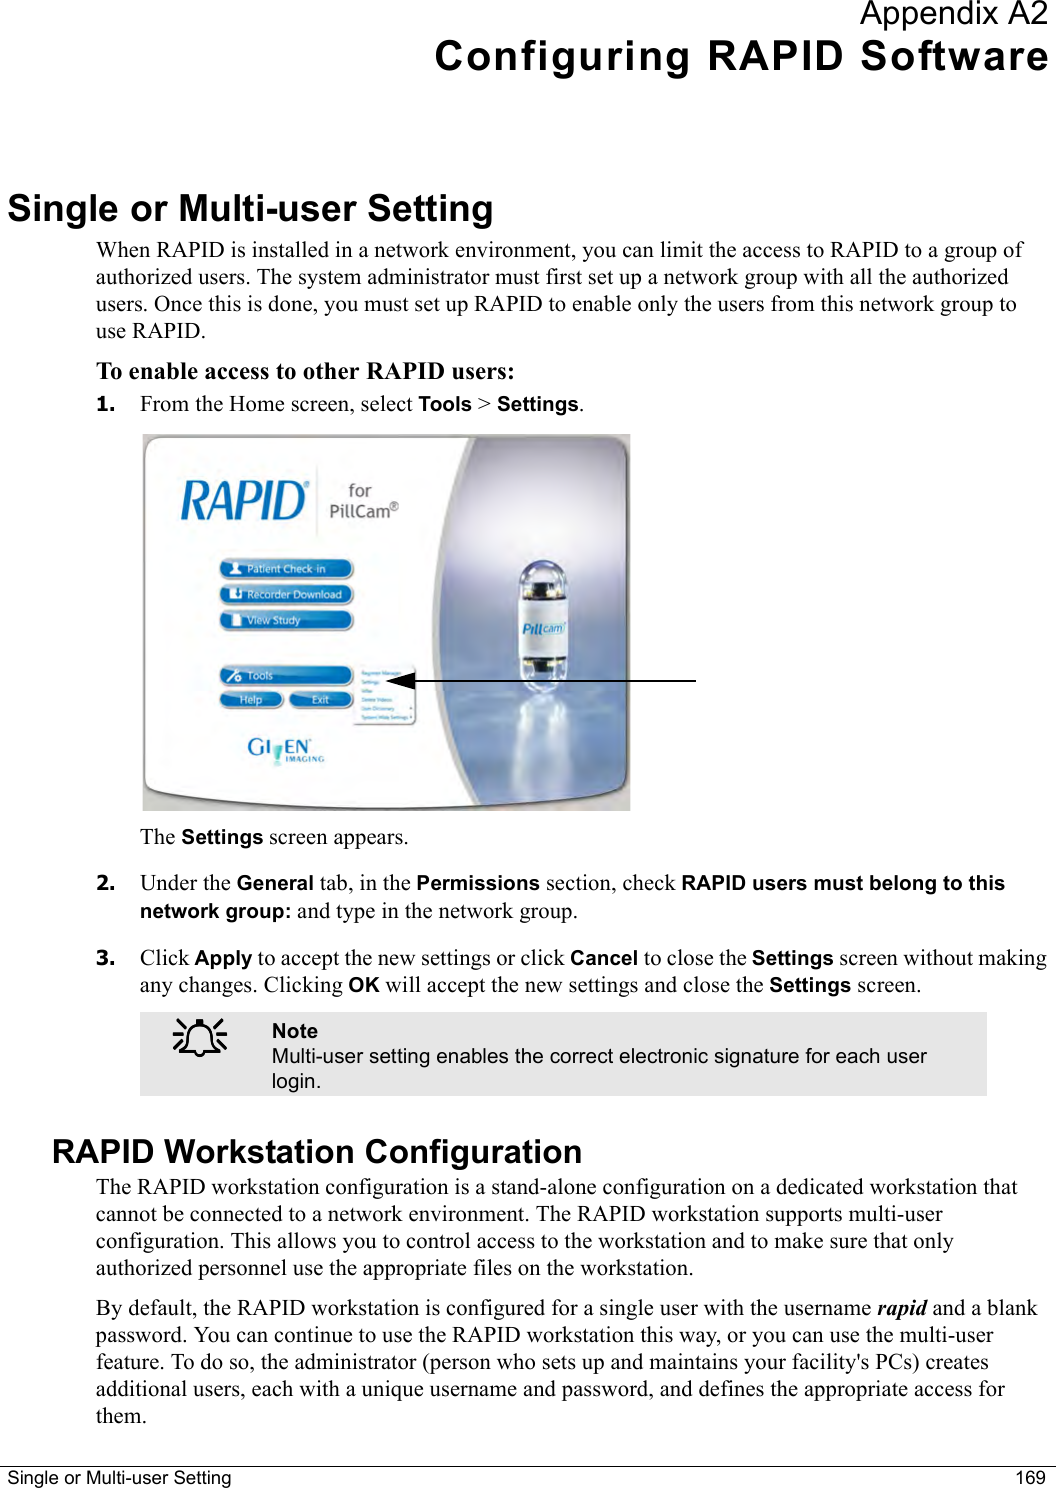 Single or Multi-user Setting 169Appendix A2Configuring RAPID SoftwareSingle or Multi-user SettingWhen RAPID is installed in a network environment, you can limit the access to RAPID to a group of authorized users. The system administrator must first set up a network group with all the authorized users. Once this is done, you must set up RAPID to enable only the users from this network group to use RAPID.To enable access to other RAPID users:1. From the Home screen, select Tools &gt; Settings. The Settings screen appears.2. Under the General tab, in the Permissions section, check RAPID users must belong to this network group: and type in the network group. 3. Click Apply to accept the new settings or click Cancel to close the Settings screen without making any changes. Clicking OK will accept the new settings and close the Settings screen.RAPID Workstation ConfigurationThe RAPID workstation configuration is a stand-alone configuration on a dedicated workstation that cannot be connected to a network environment. The RAPID workstation supports multi-user configuration. This allows you to control access to the workstation and to make sure that only authorized personnel use the appropriate files on the workstation. By default, the RAPID workstation is configured for a single user with the username rapid and a blank password. You can continue to use the RAPID workstation this way, or you can use the multi-user feature. To do so, the administrator (person who sets up and maintains your facility&apos;s PCs) creates additional users, each with a unique username and password, and defines the appropriate access for them.֠֠֠֠NoteMulti-user setting enables the correct electronic signature for each user login.